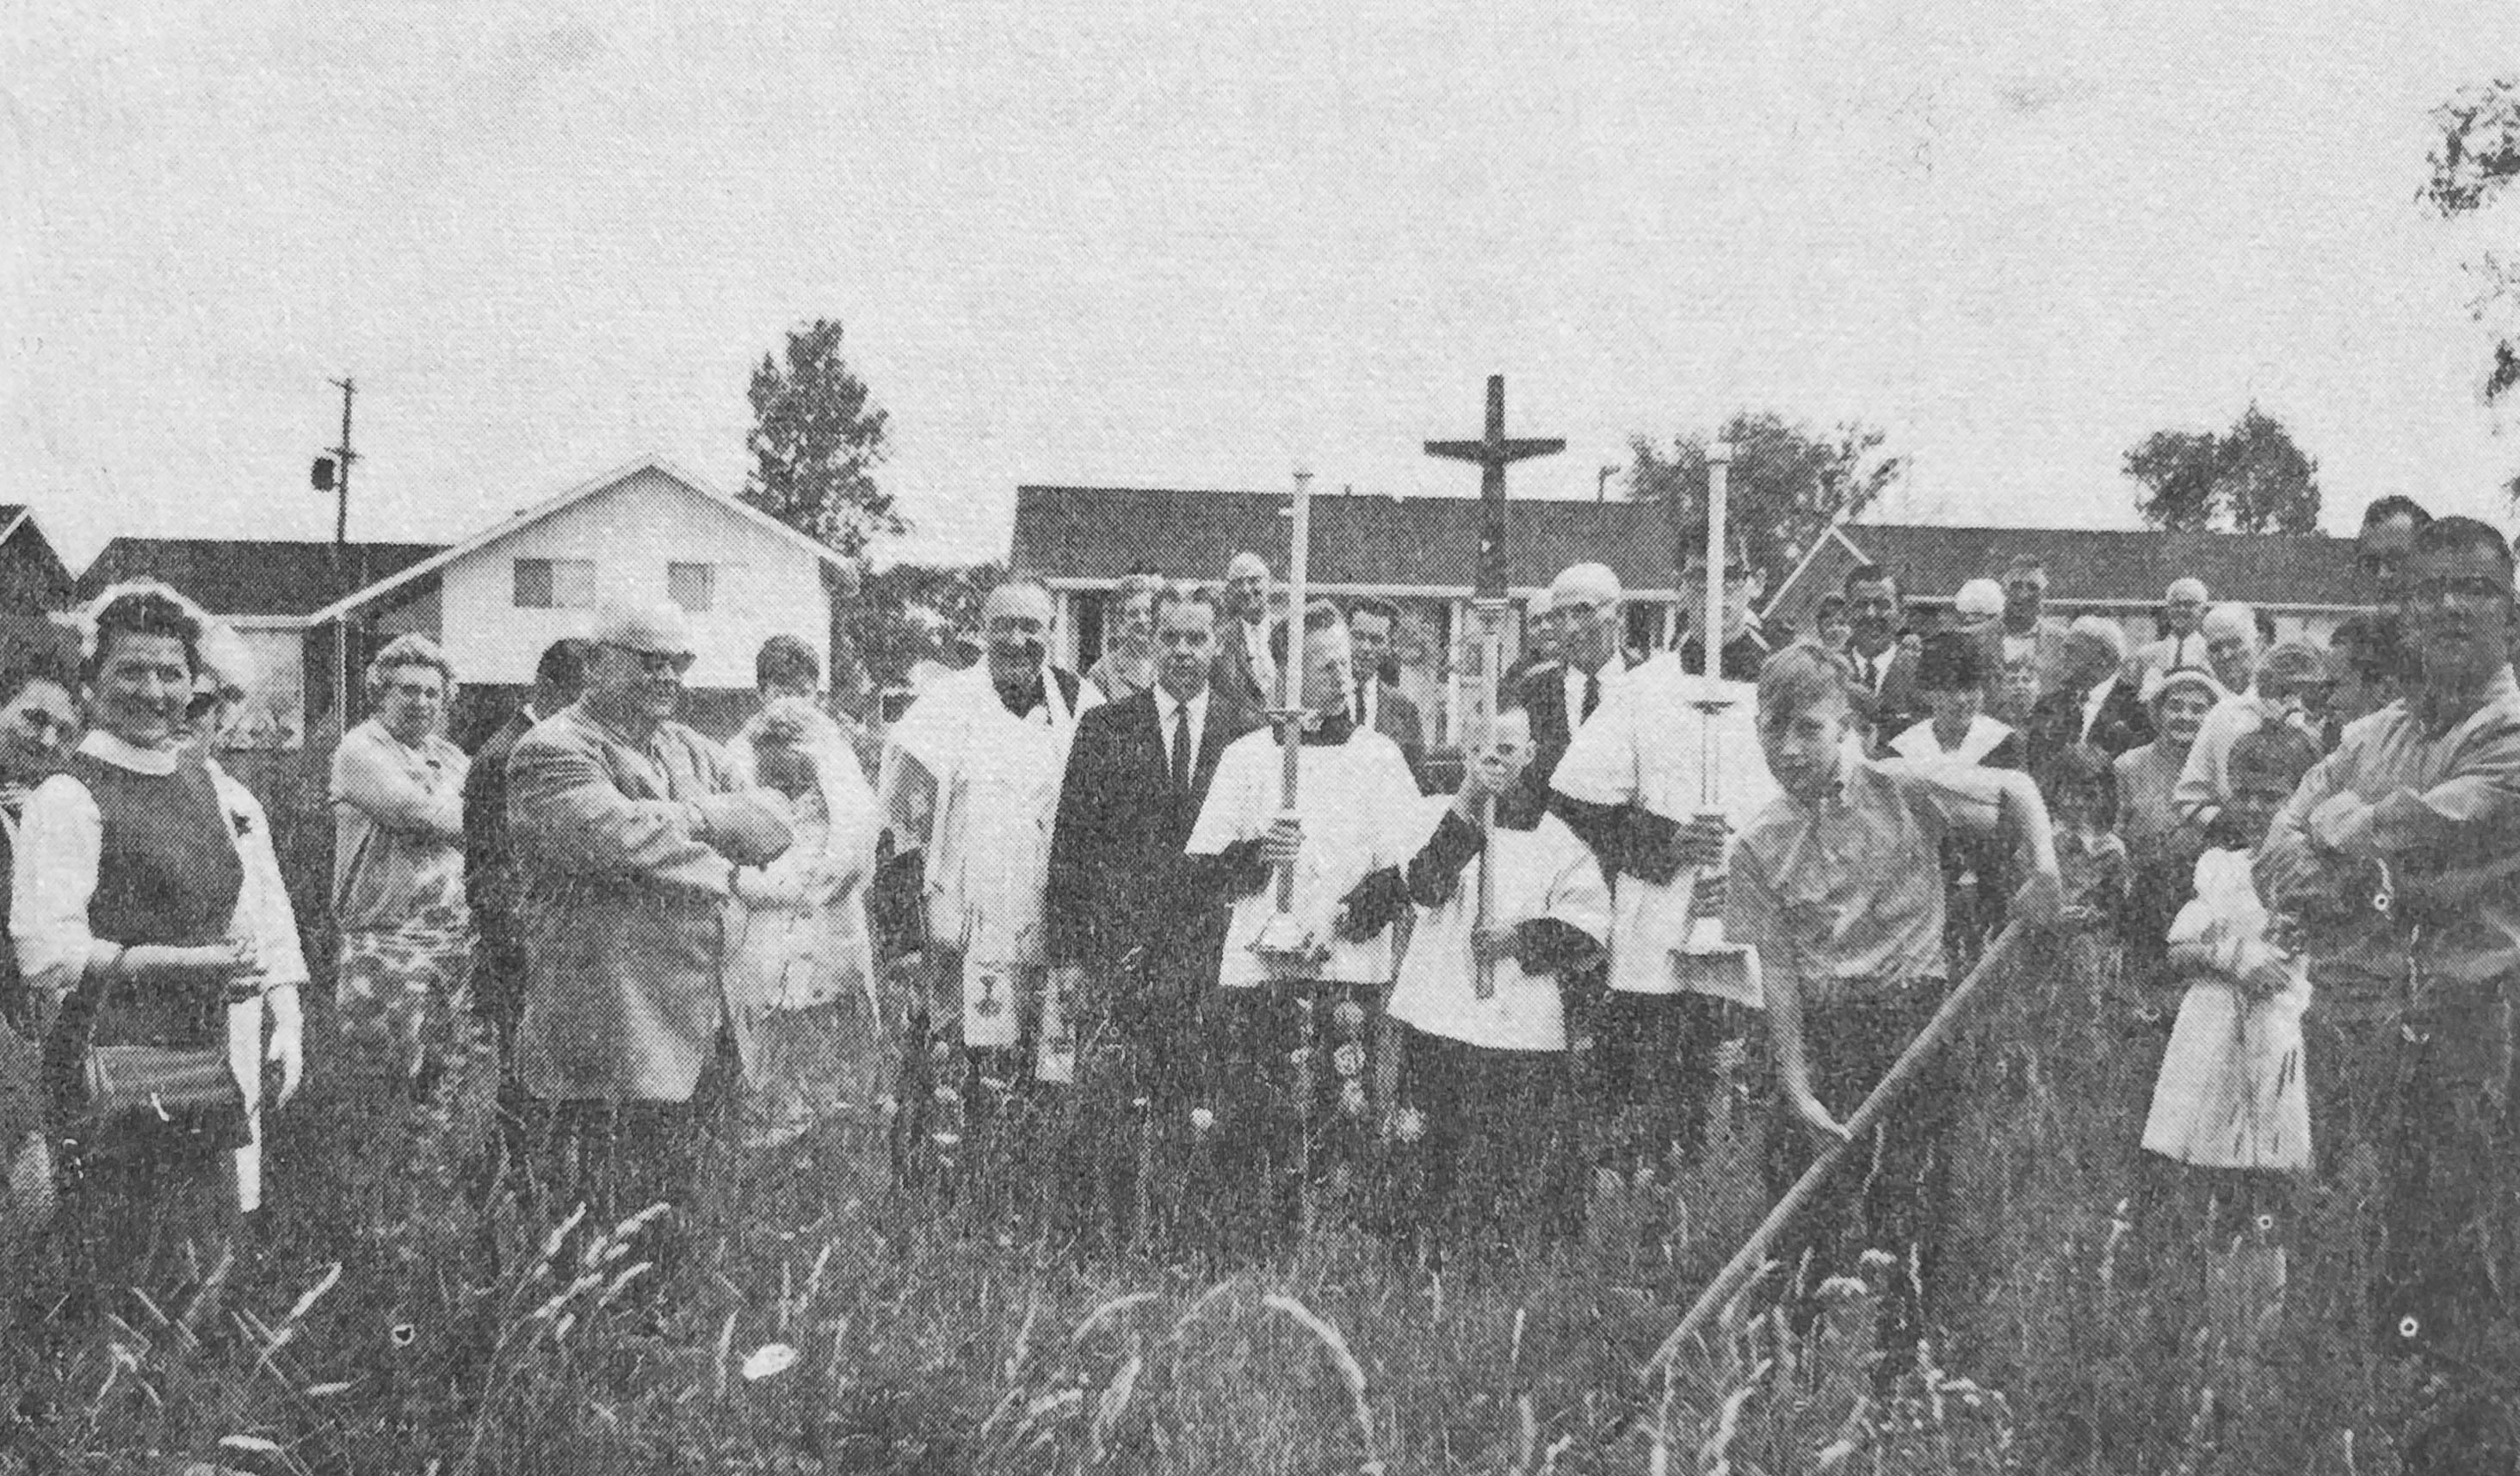 Photo of parishioners processing on grounds of St. Timothy pre-construction